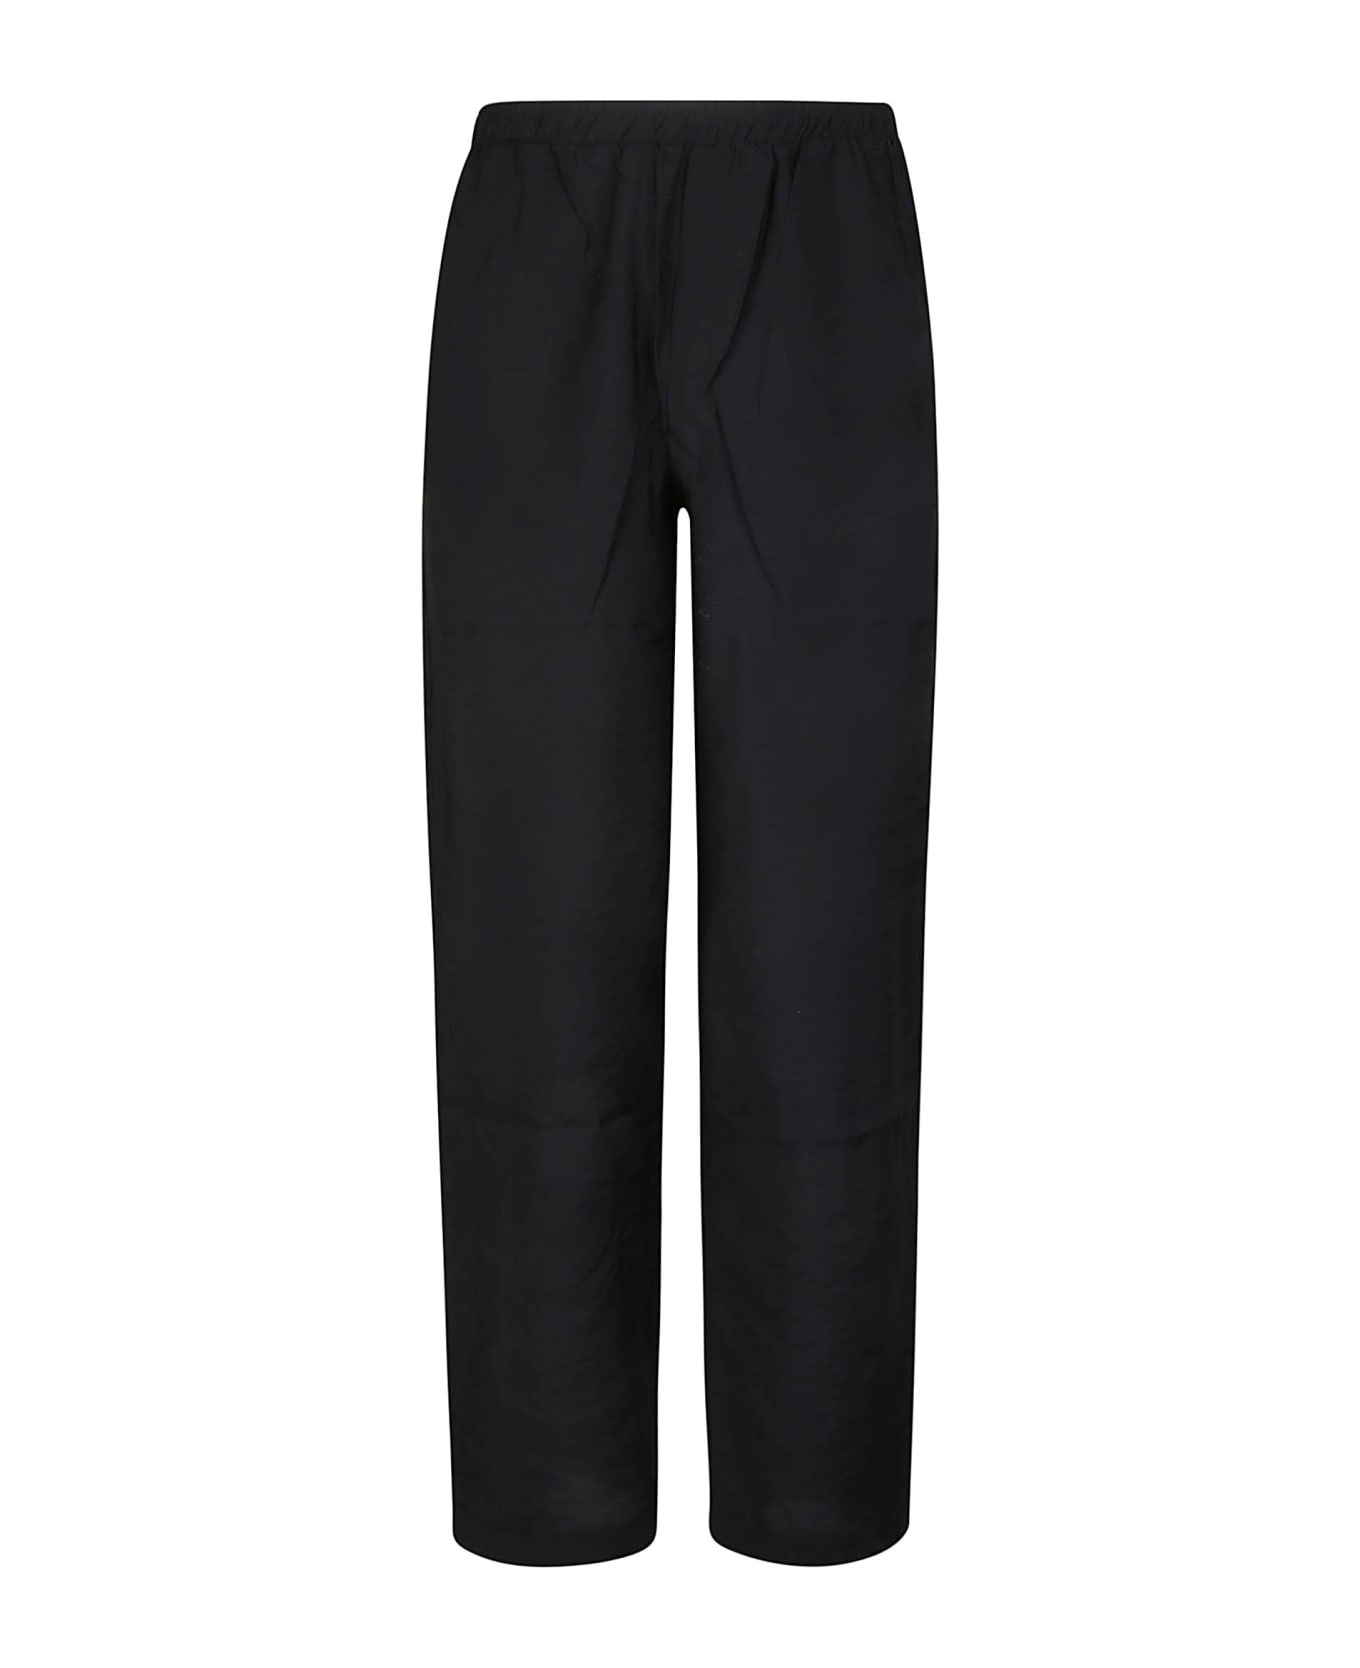 Family First Milano Soft Cupro Pant - BLACK ボトムス